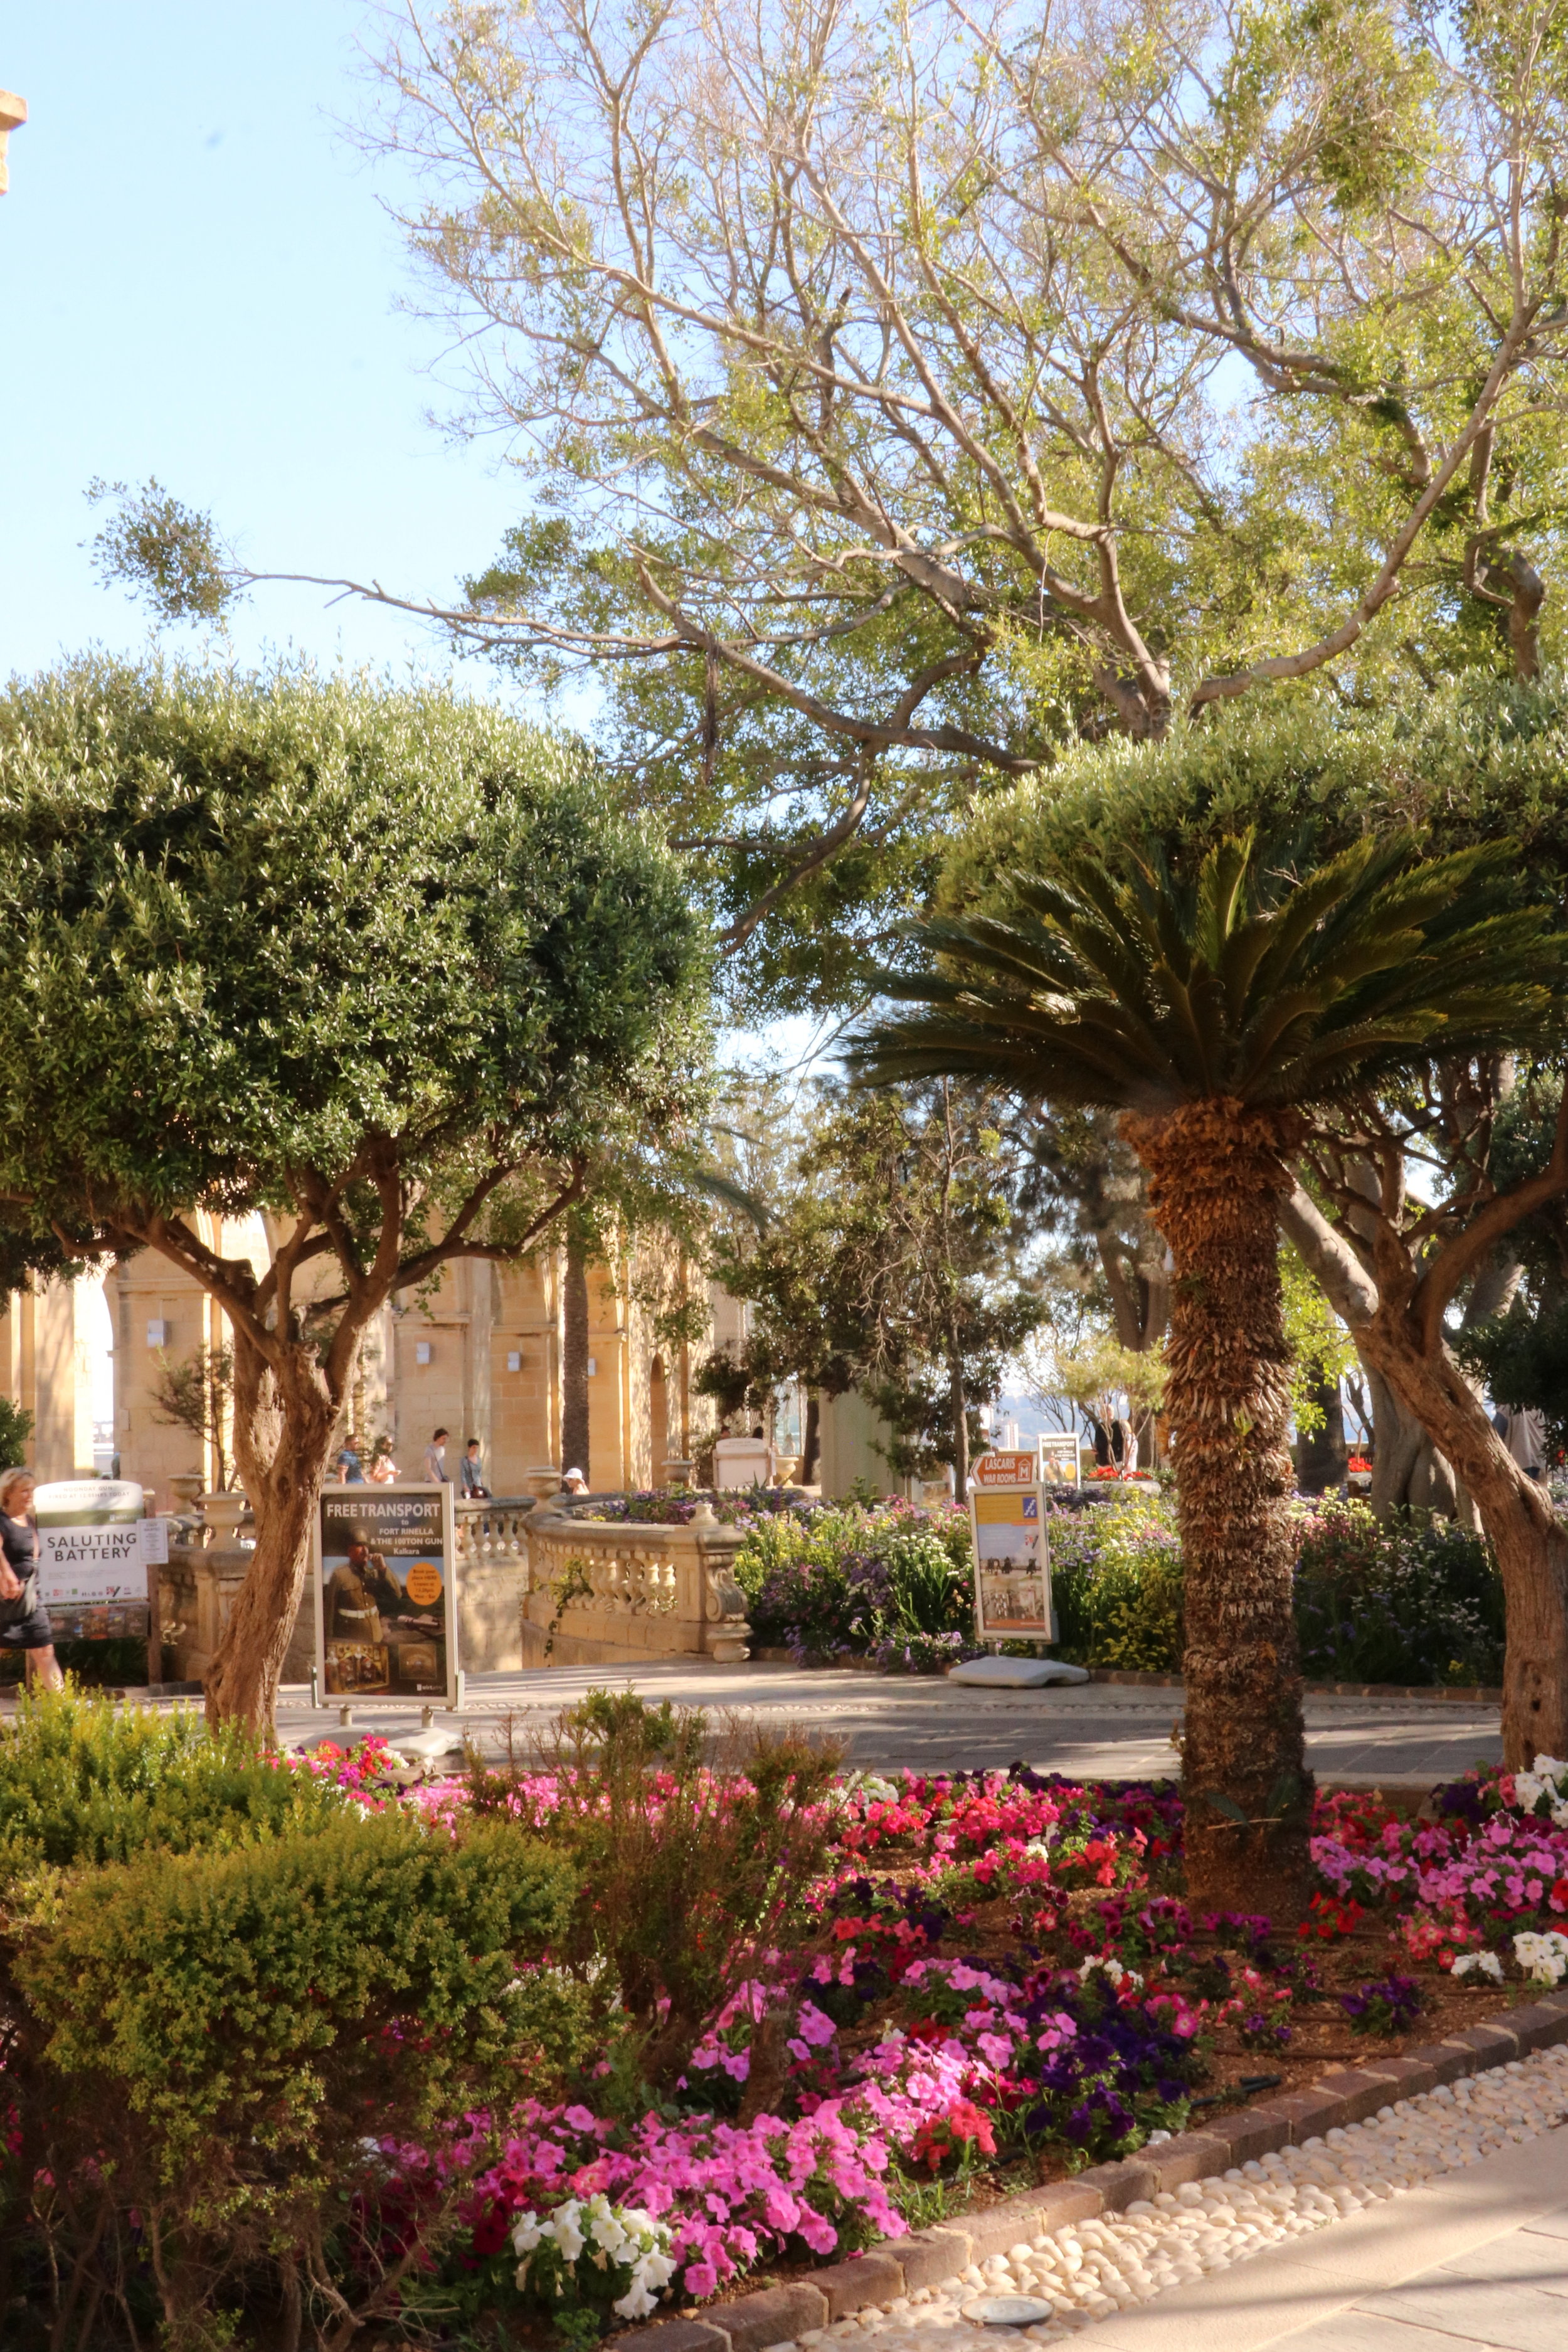 The lush Upper Barrakka Gardens of Valletta, Malta with many trees and colorful flowers